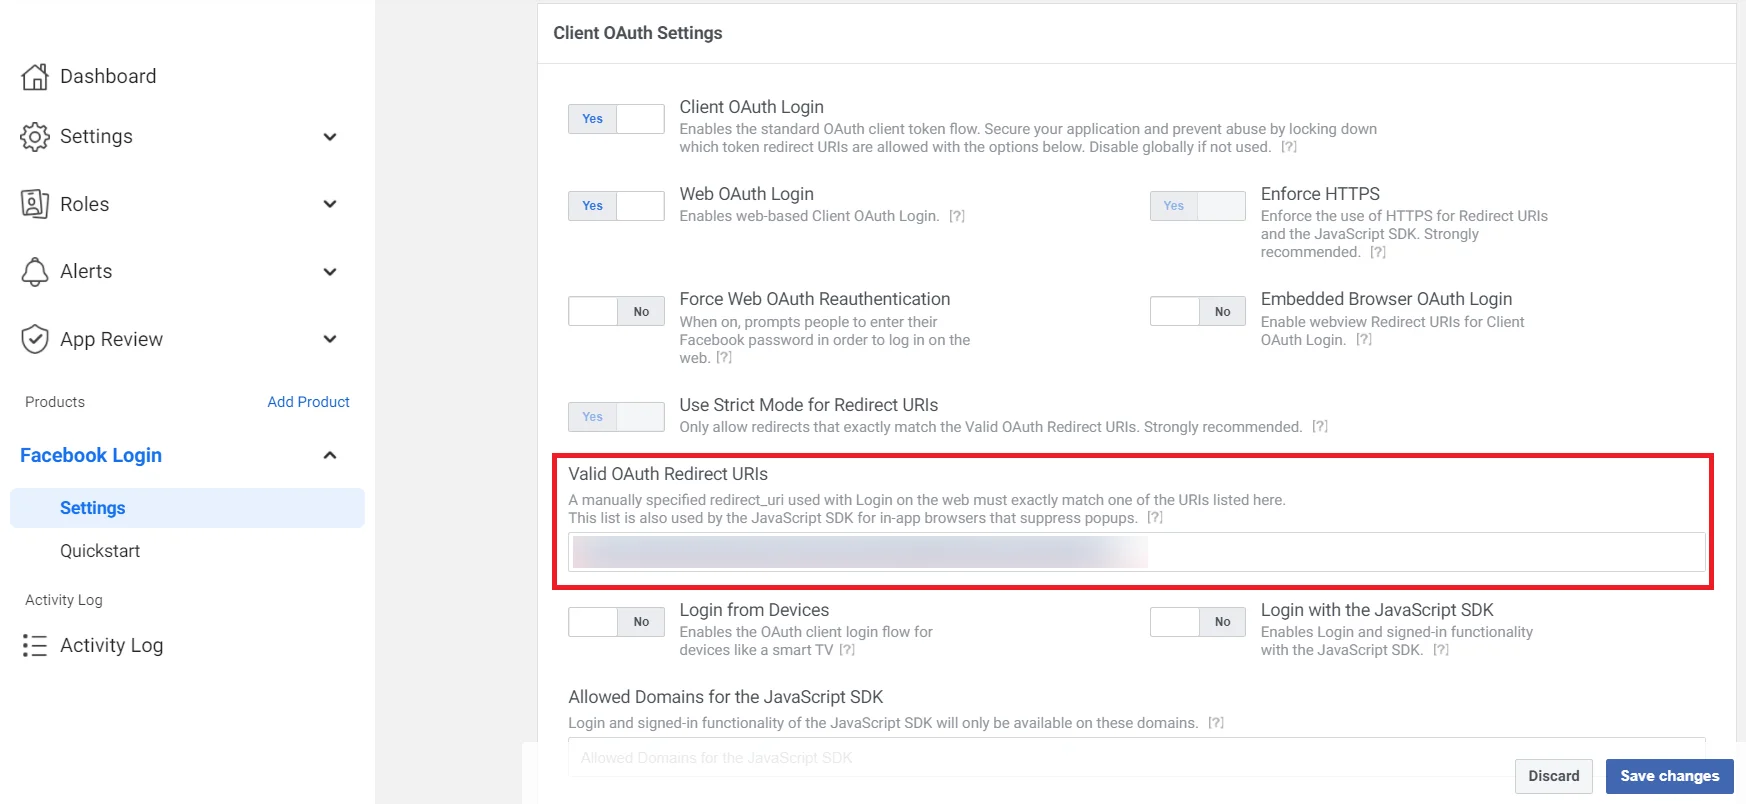 OAuth/OpenID/OIDC Single Sign On (SSO) Facebook SSO client oauth setting